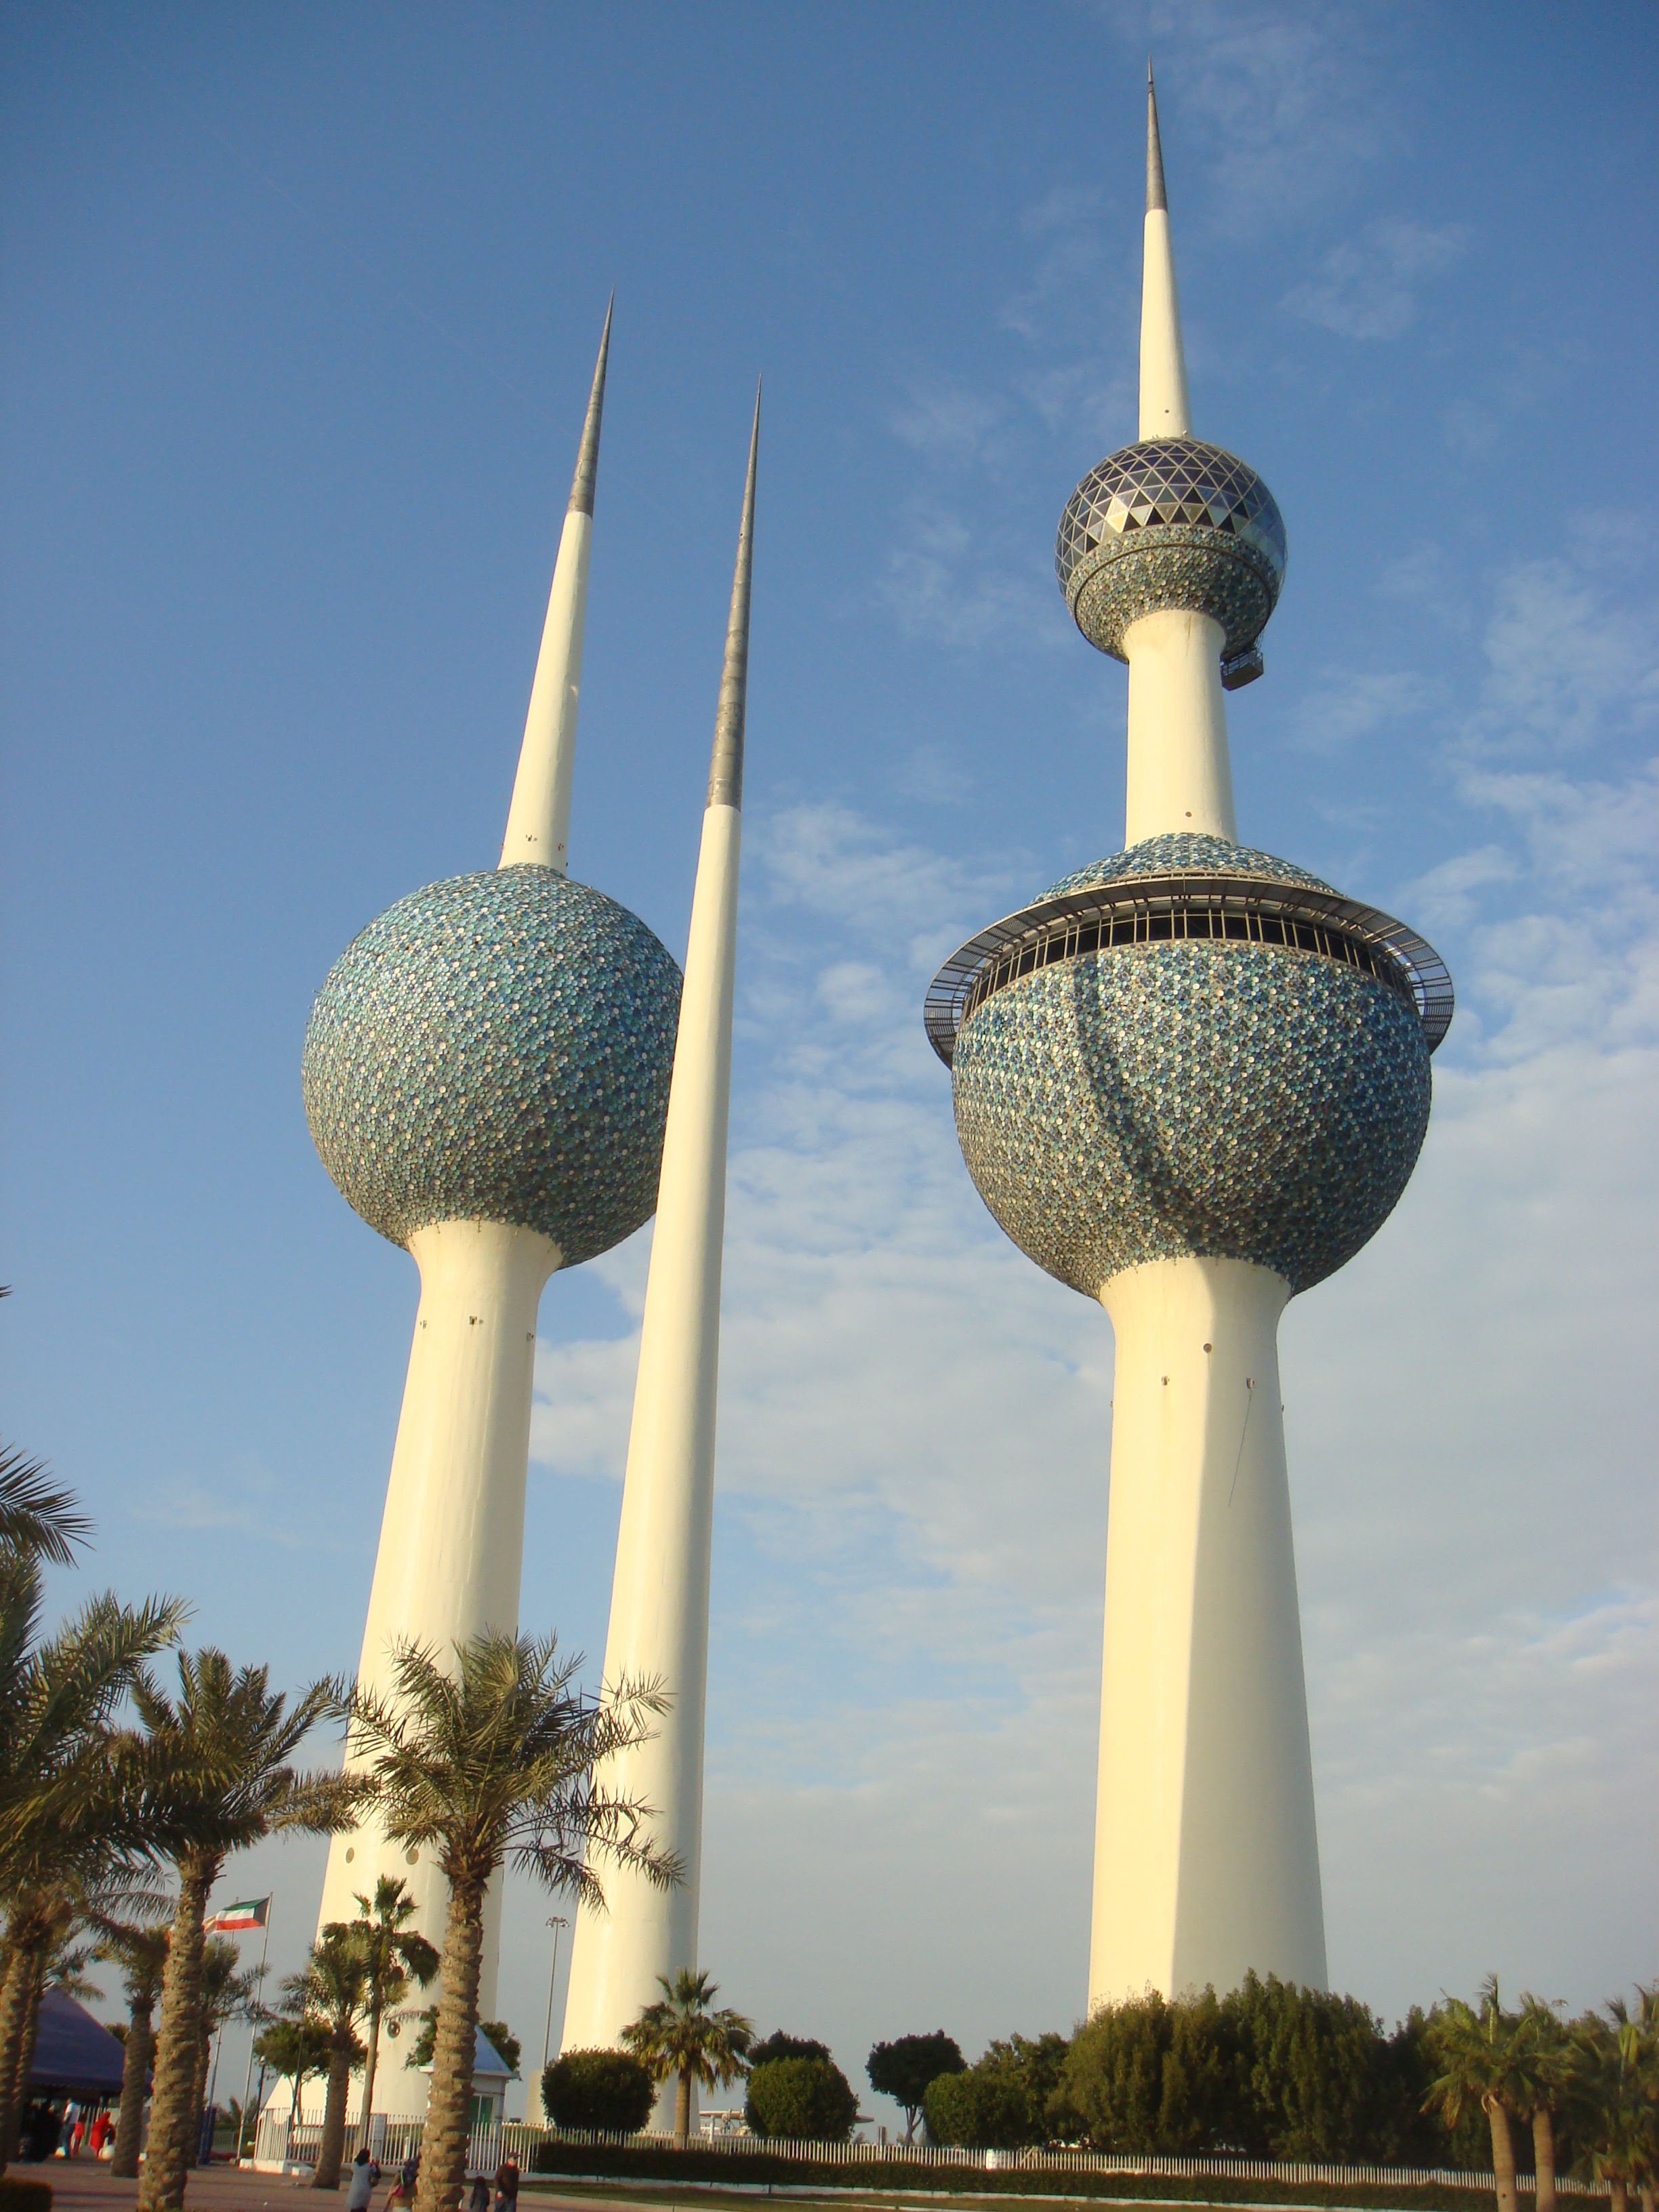 Here is a list of the most beautiful tourist places - Here is a list of the most beautiful tourist places in Kuwait 2019